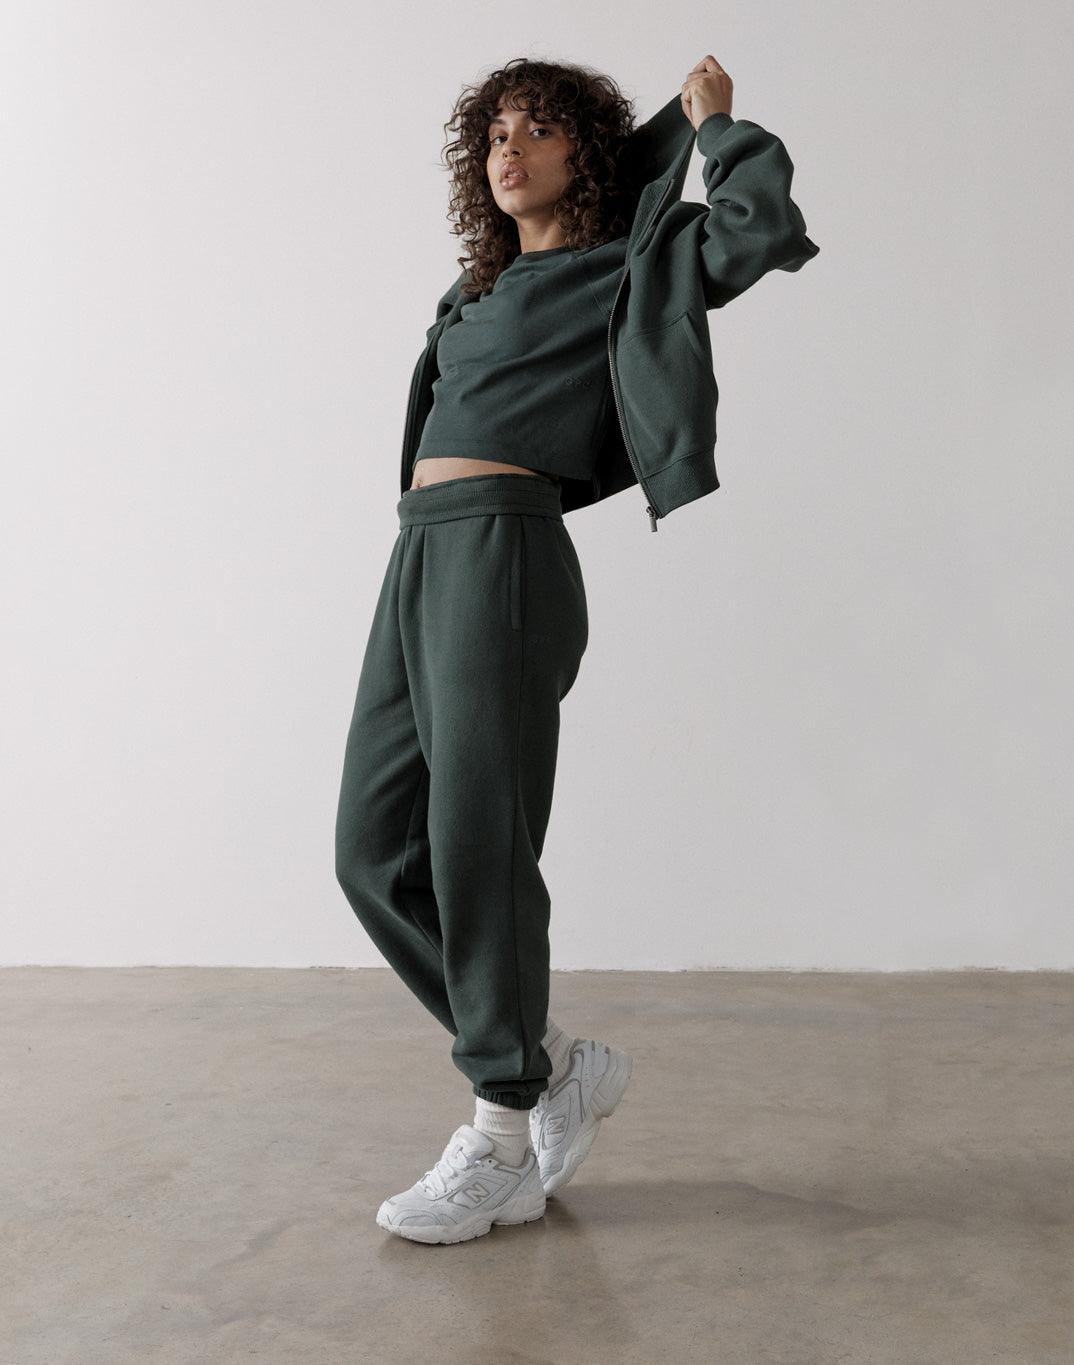 The Jogger in Earth Green - Joggers - Gym+Coffee IE